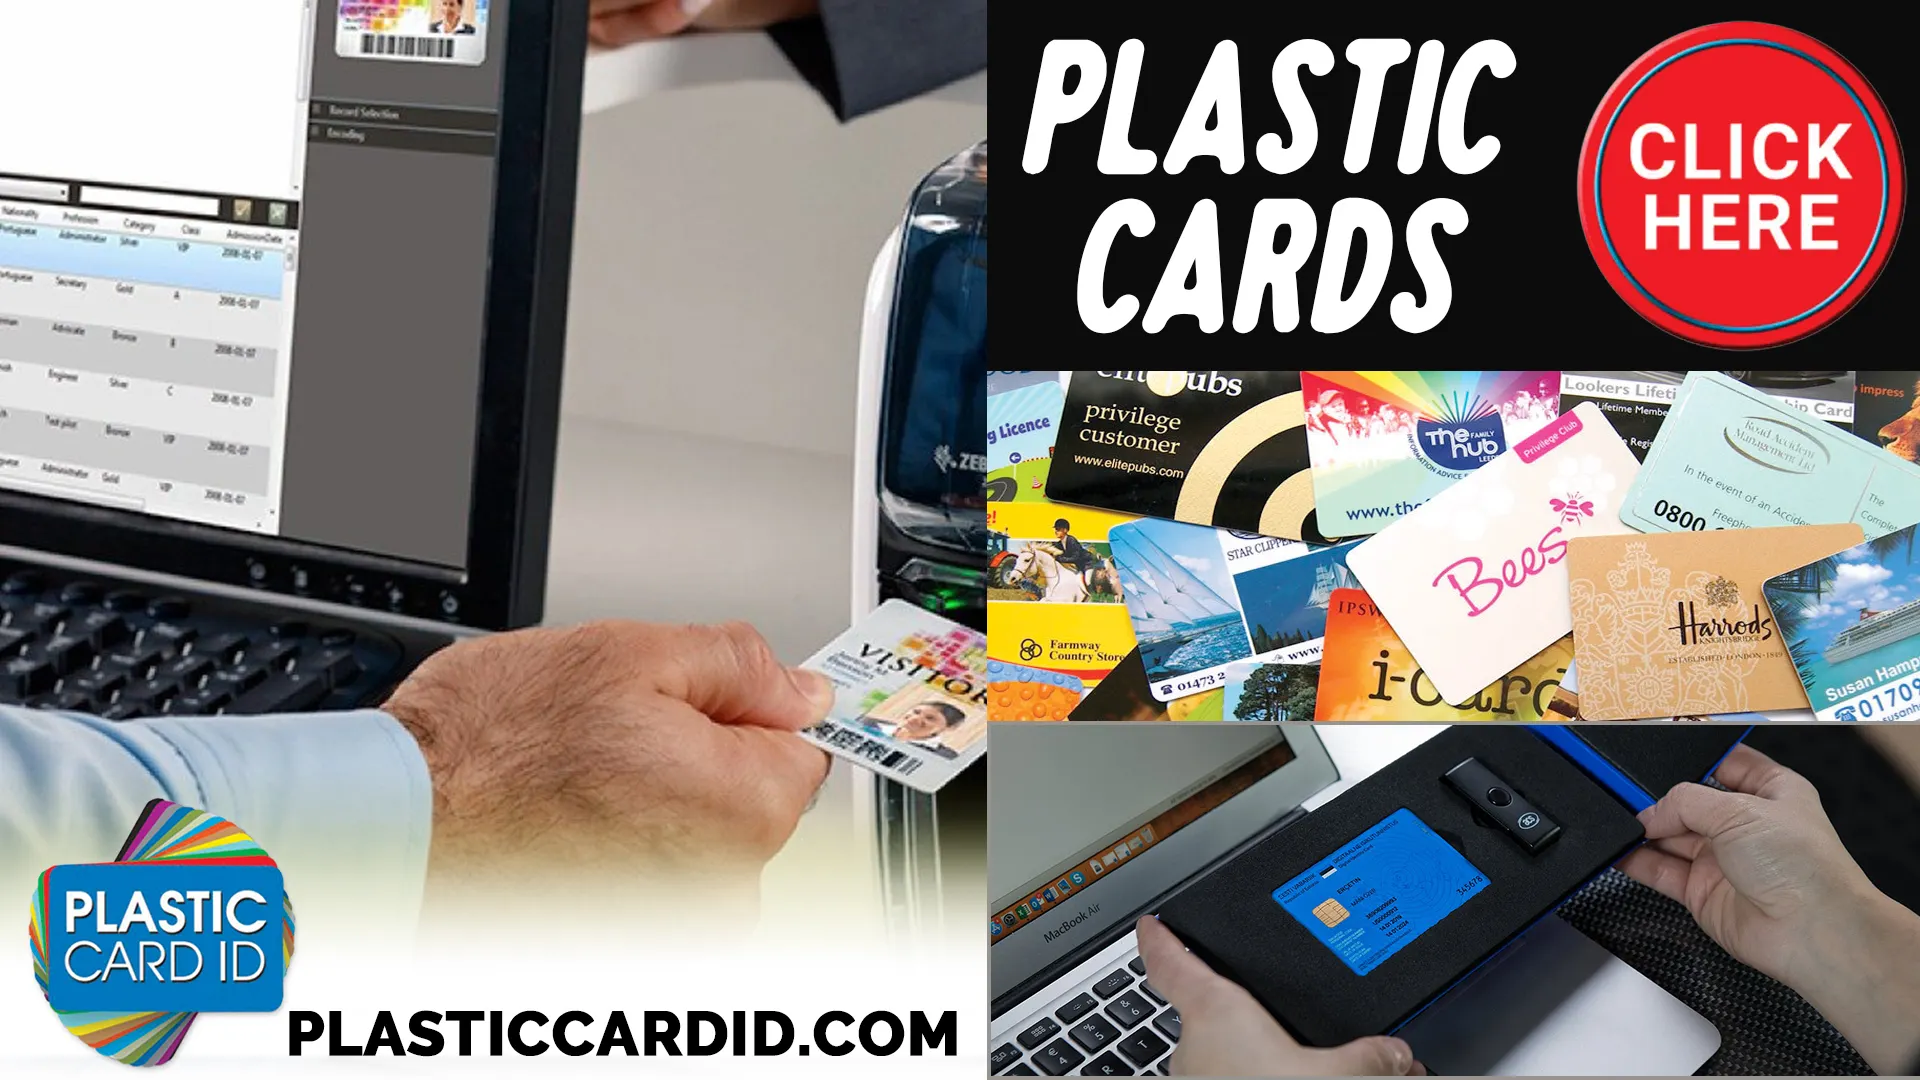 Plastic Card ID
: Harnessing Zebra Innovation to Empower Your Business